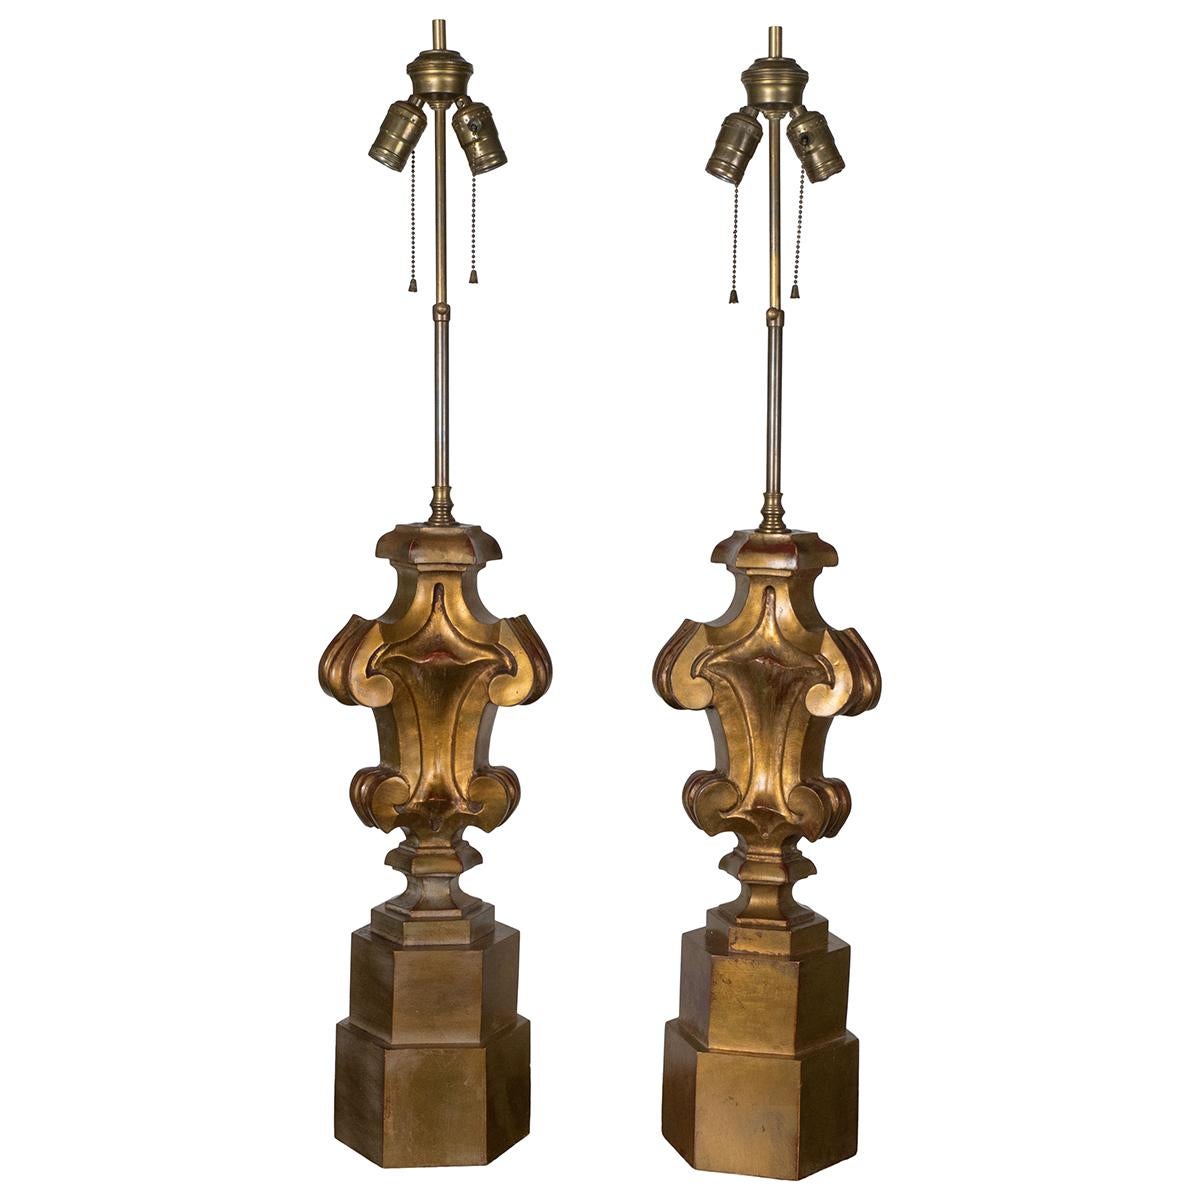 Pair of sculptural carved giltwood table lamps.